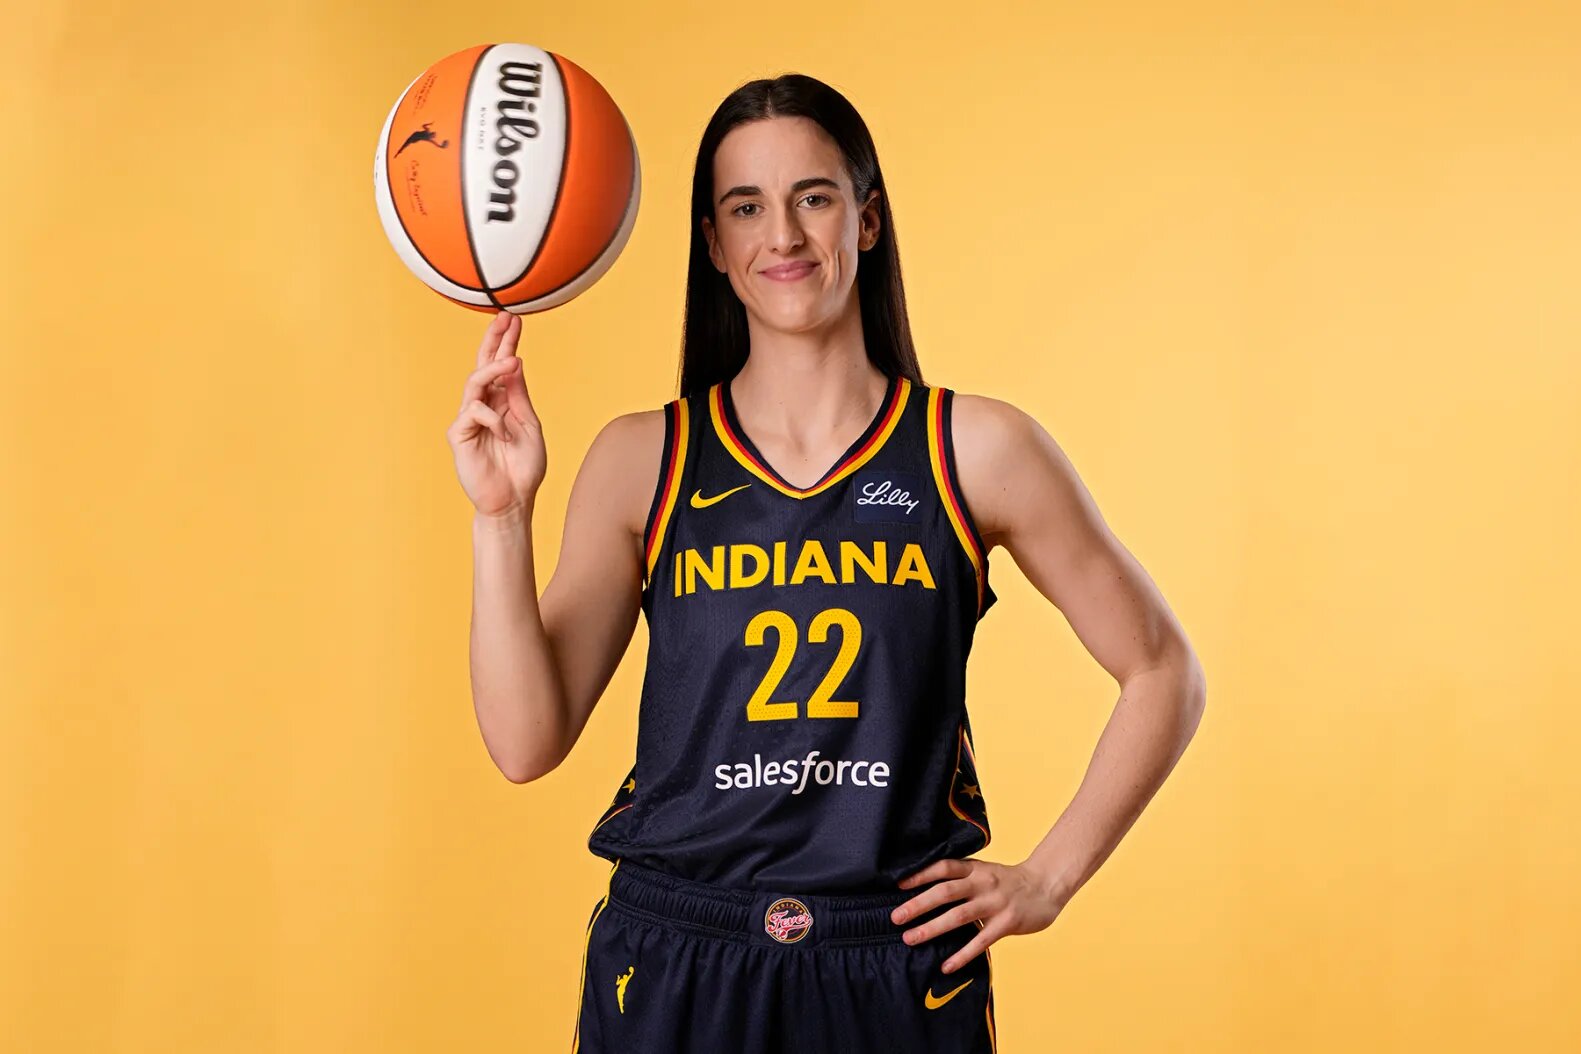 ESPN news: Caitlin Clark’s Initial Case of Indiana Fever Why Bobblehead Is Going Viral Is Completely Incorrect